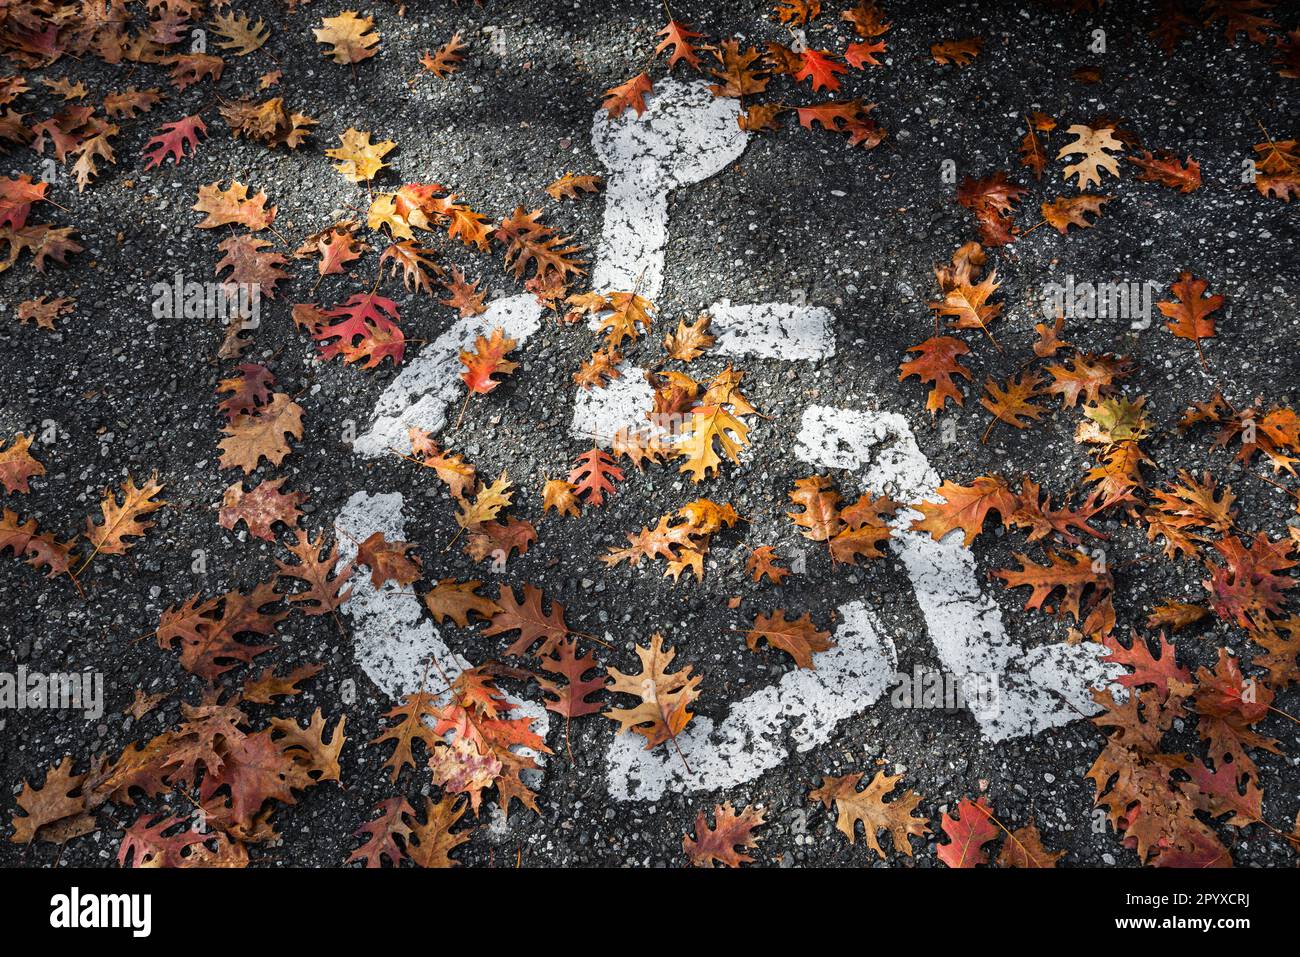 Fallen leaves during Autumn on a disabled parking designation at a doctor's office in North Central Florida. Stock Photo